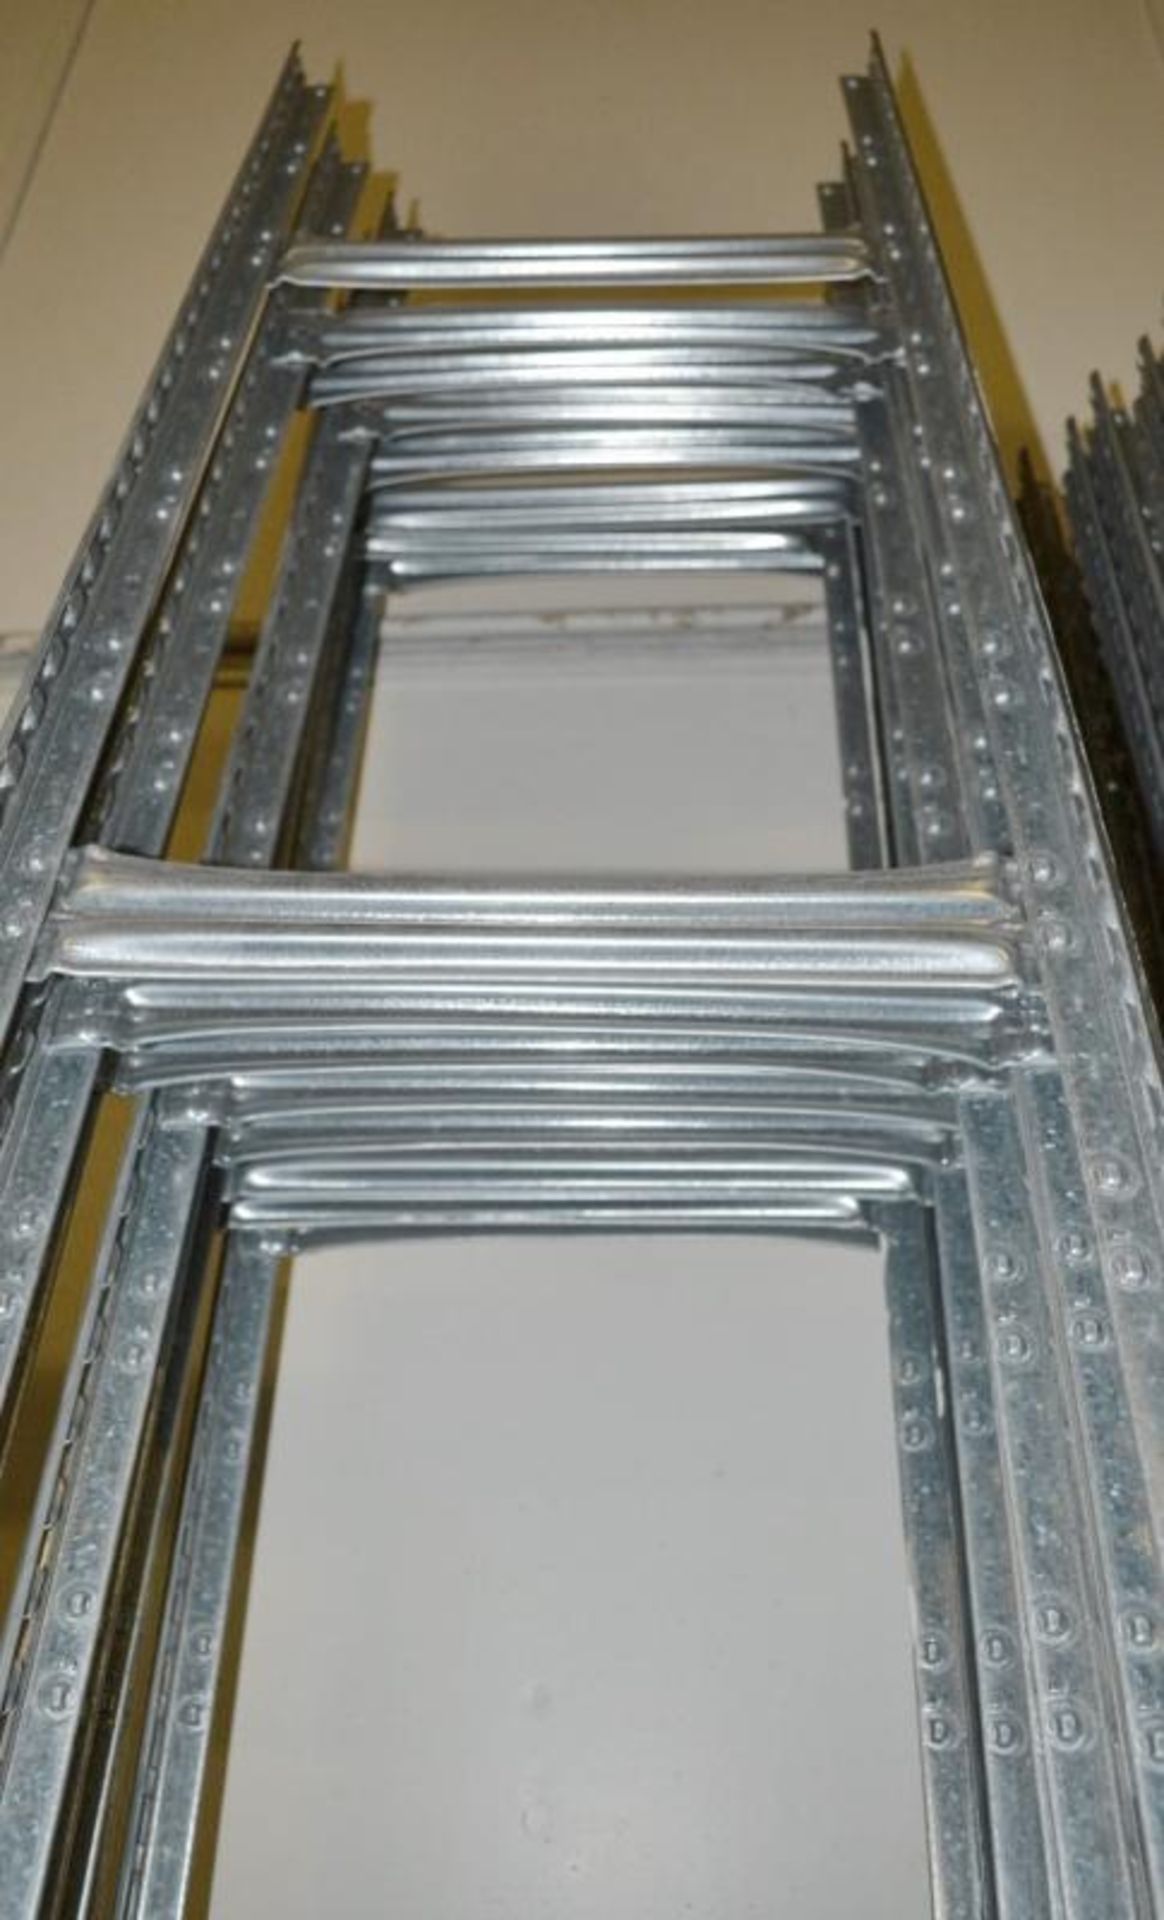 13 x Bays of Metalsistem Steel Modular Storage Shelving - Includes 28 Pieces - Recently Removed - Image 7 of 18